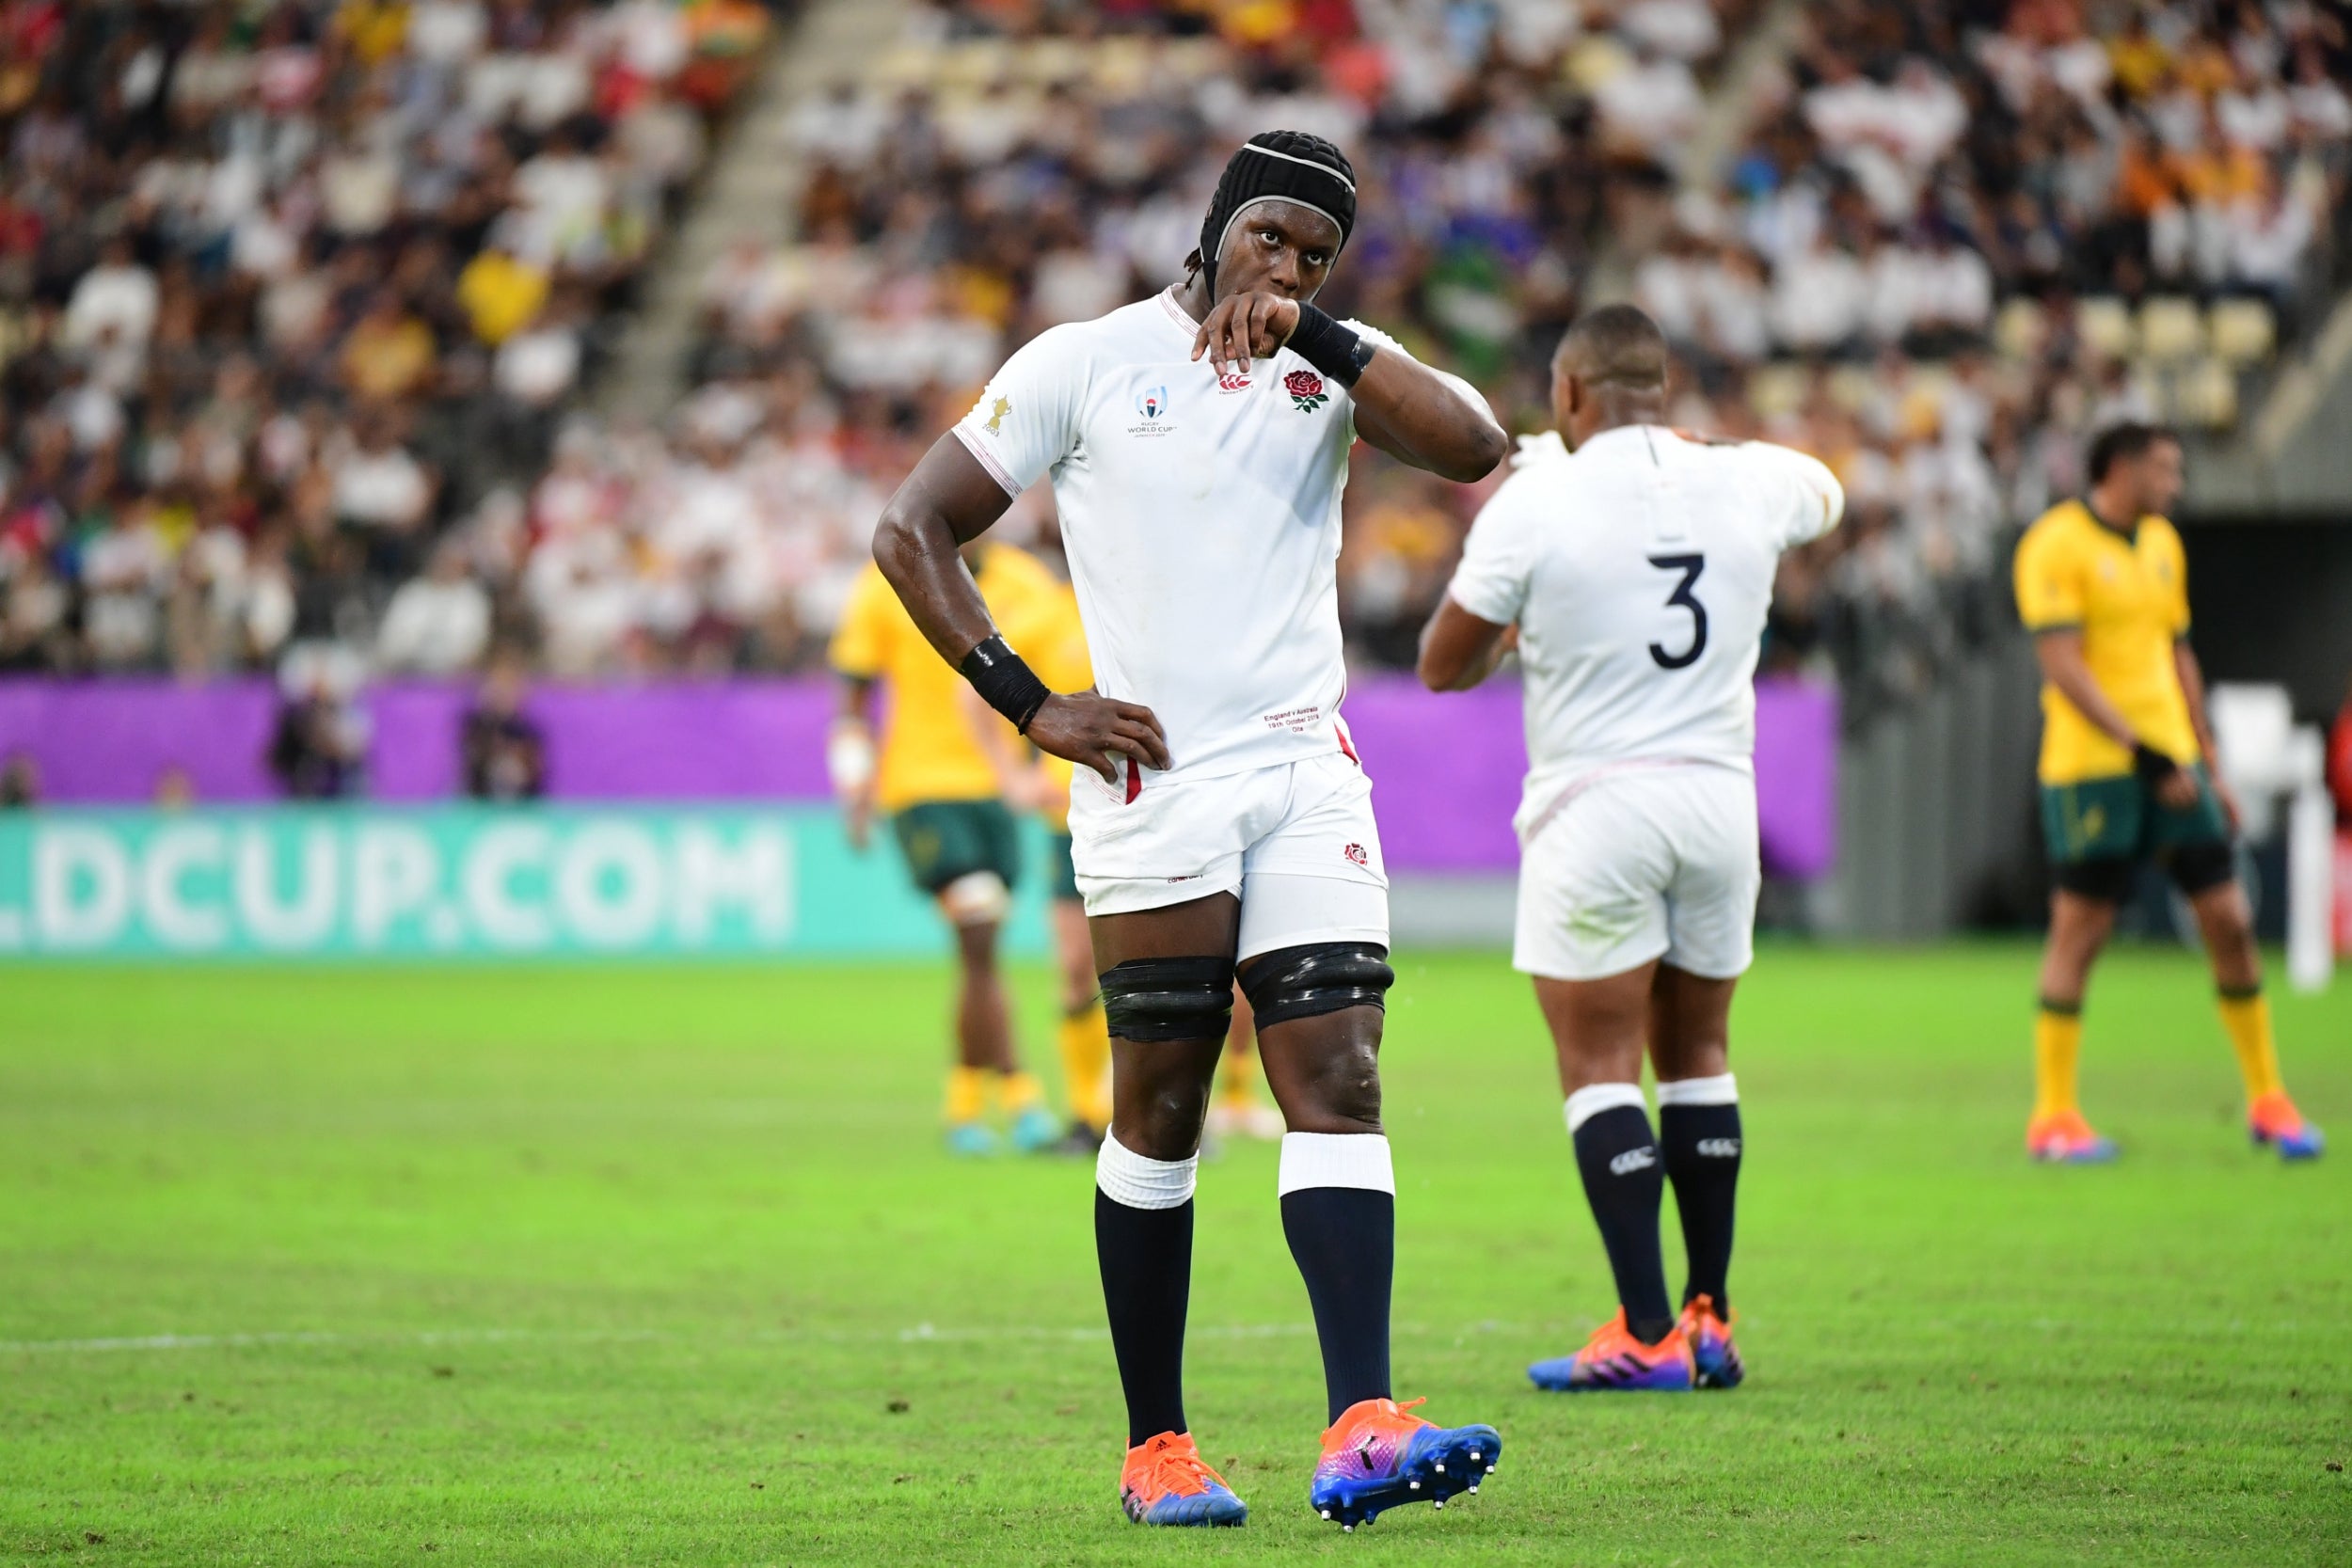 Maro Itoje in action against Australia (Getty Images)